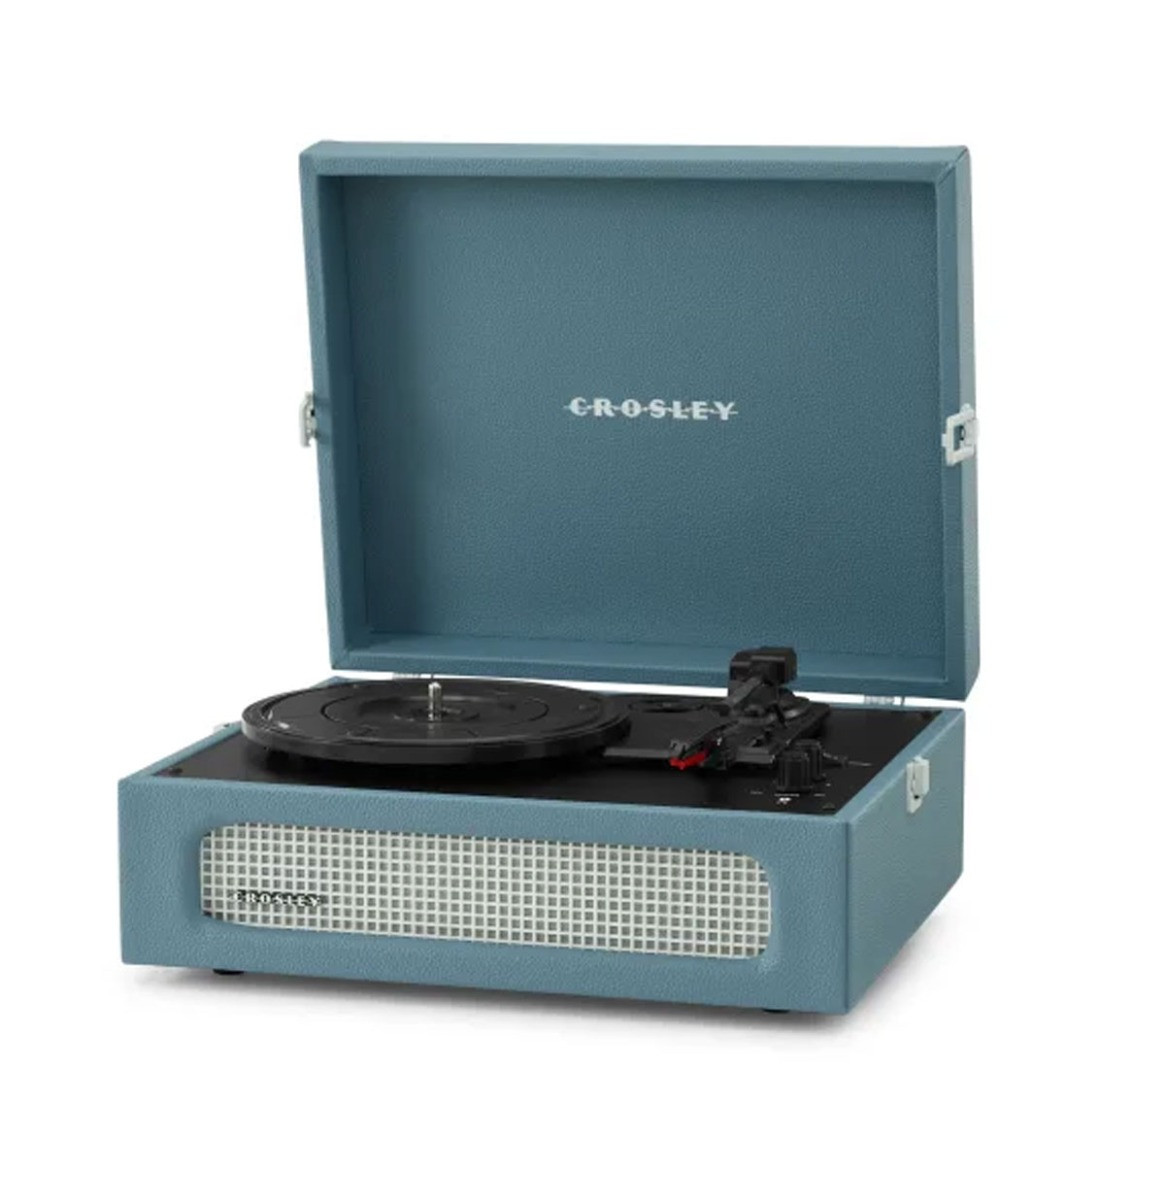 Crosley Voyager Portable Retro Platenspeler - Washed Blue BLUETOOTH IN (B-STOCK)